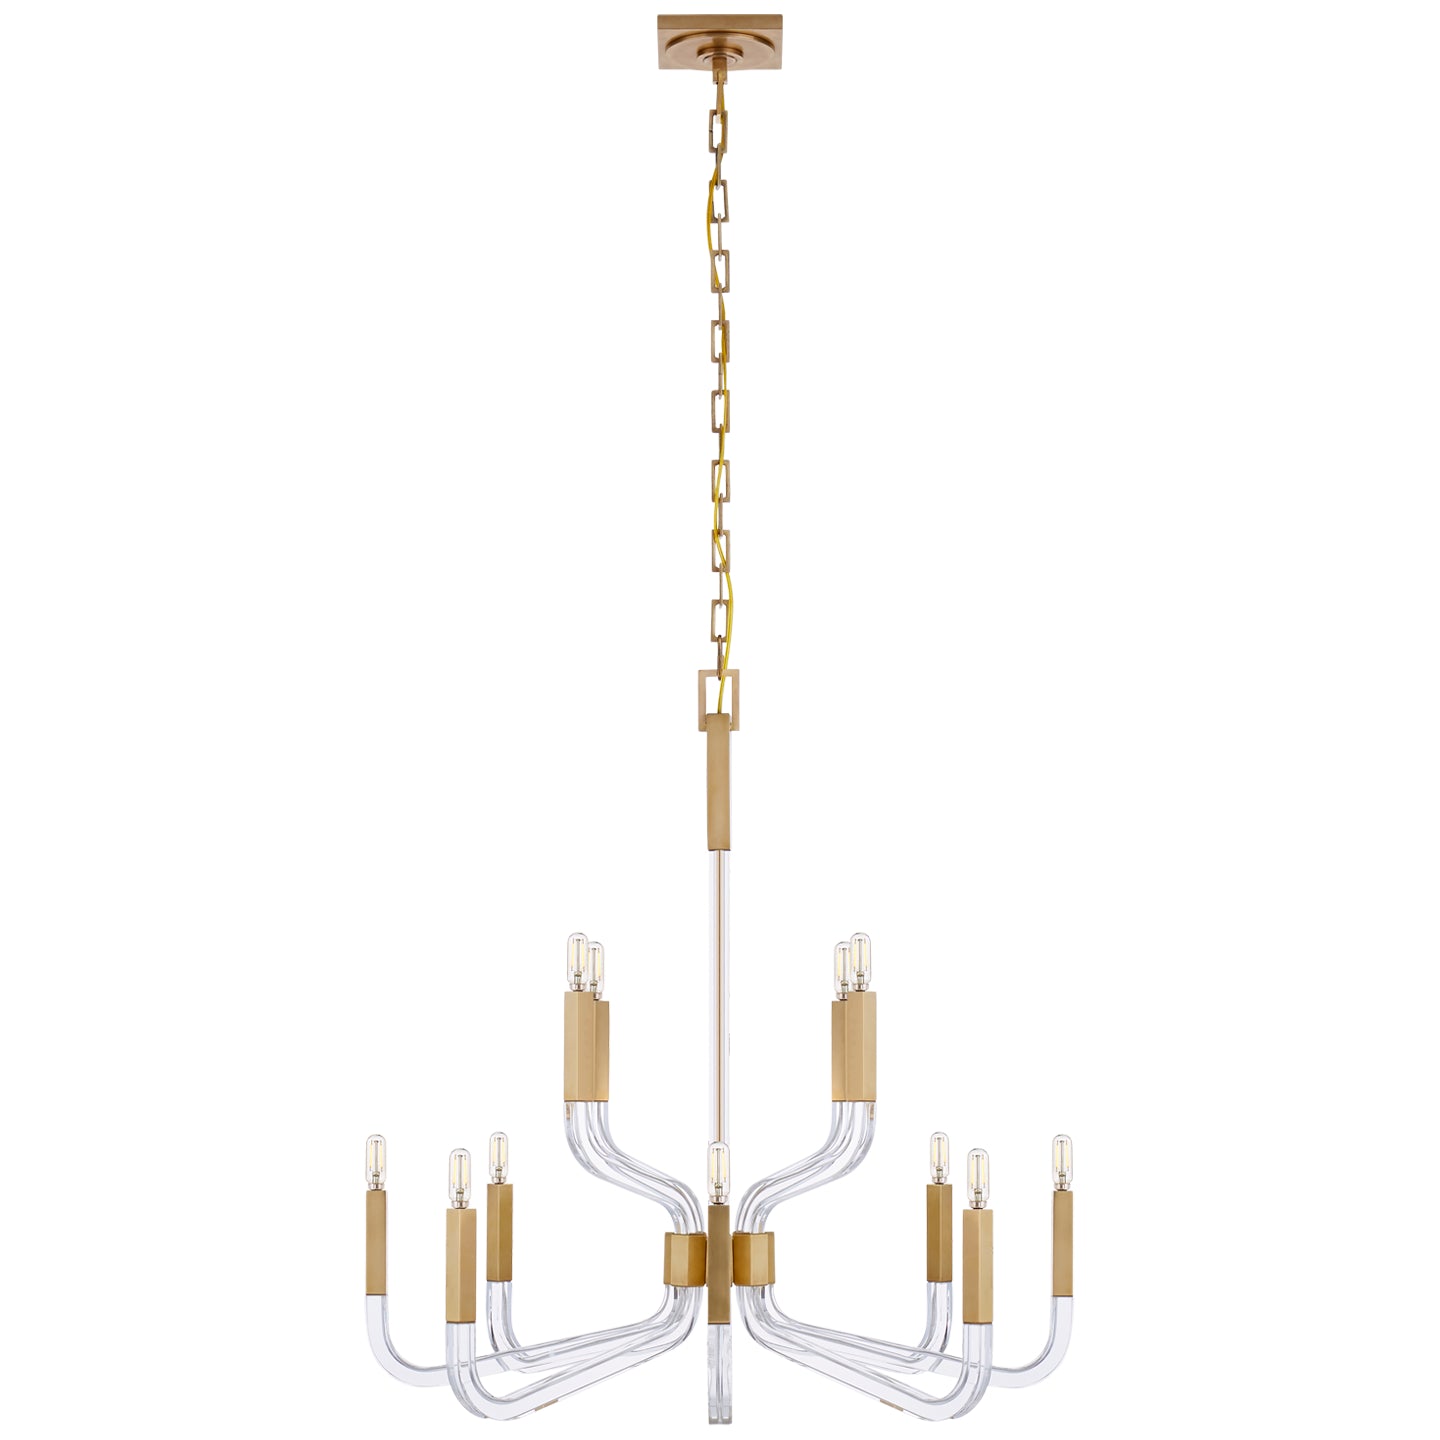 Visual Comfort Signature - CHC 5903AB/CG - 12 Light Chandelier - Reagan - Antique-Burnished Brass and Crystal